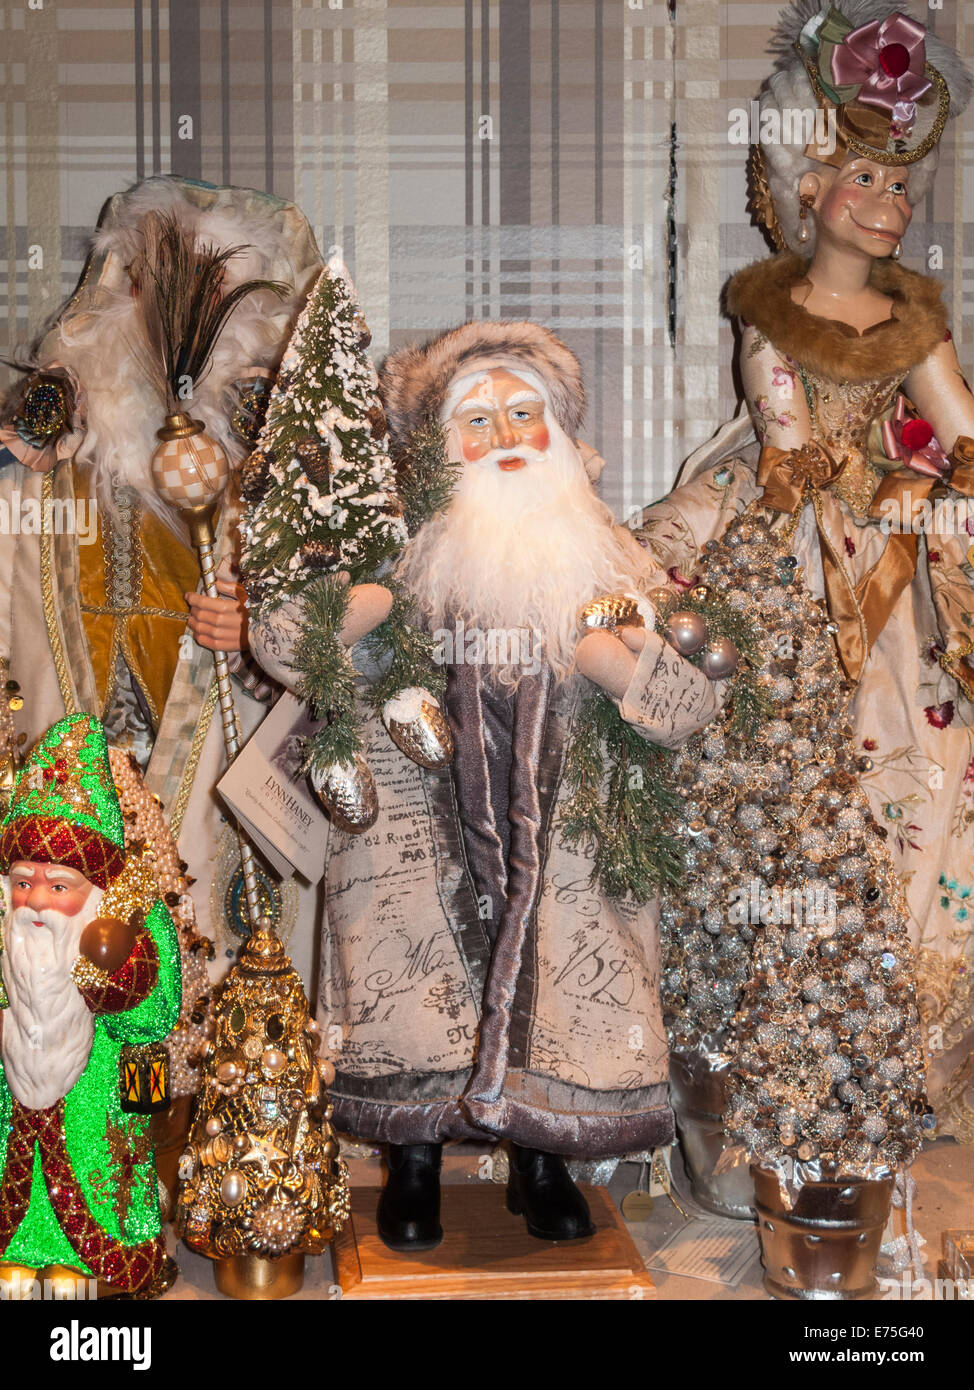 Traditional Santa Claus / St Nicholas Father Christmas figure in a festive shop display in Manhattan, New York Stock Photo